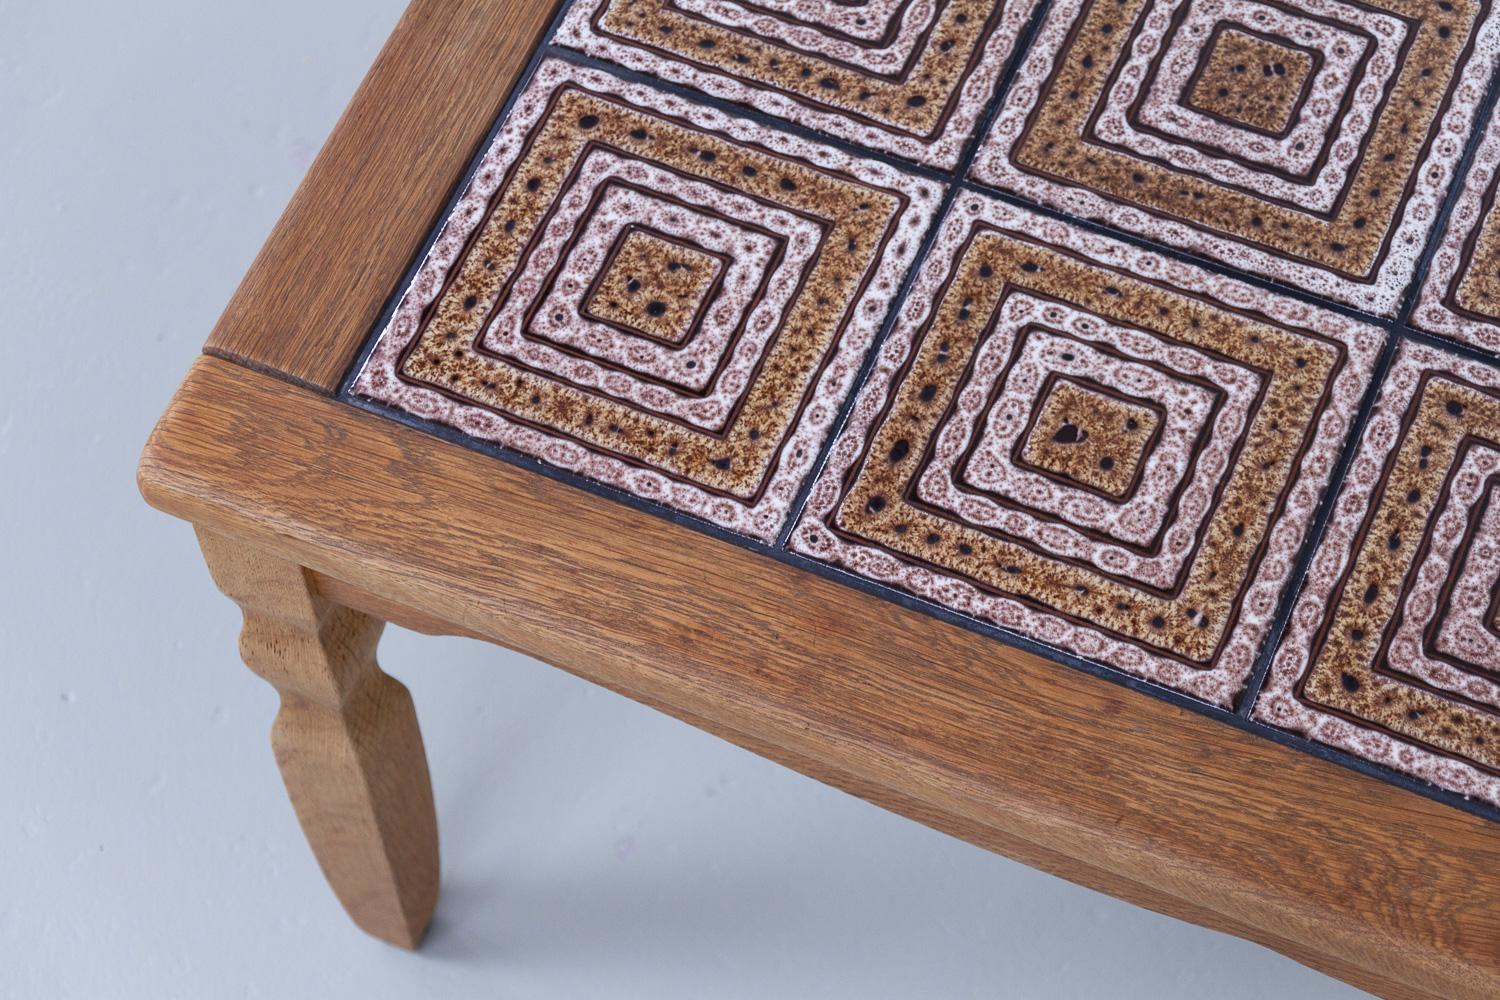 Vintage Danish Brutalist Coffee Table in Oak with Tiles, 1960s. For Sale 3